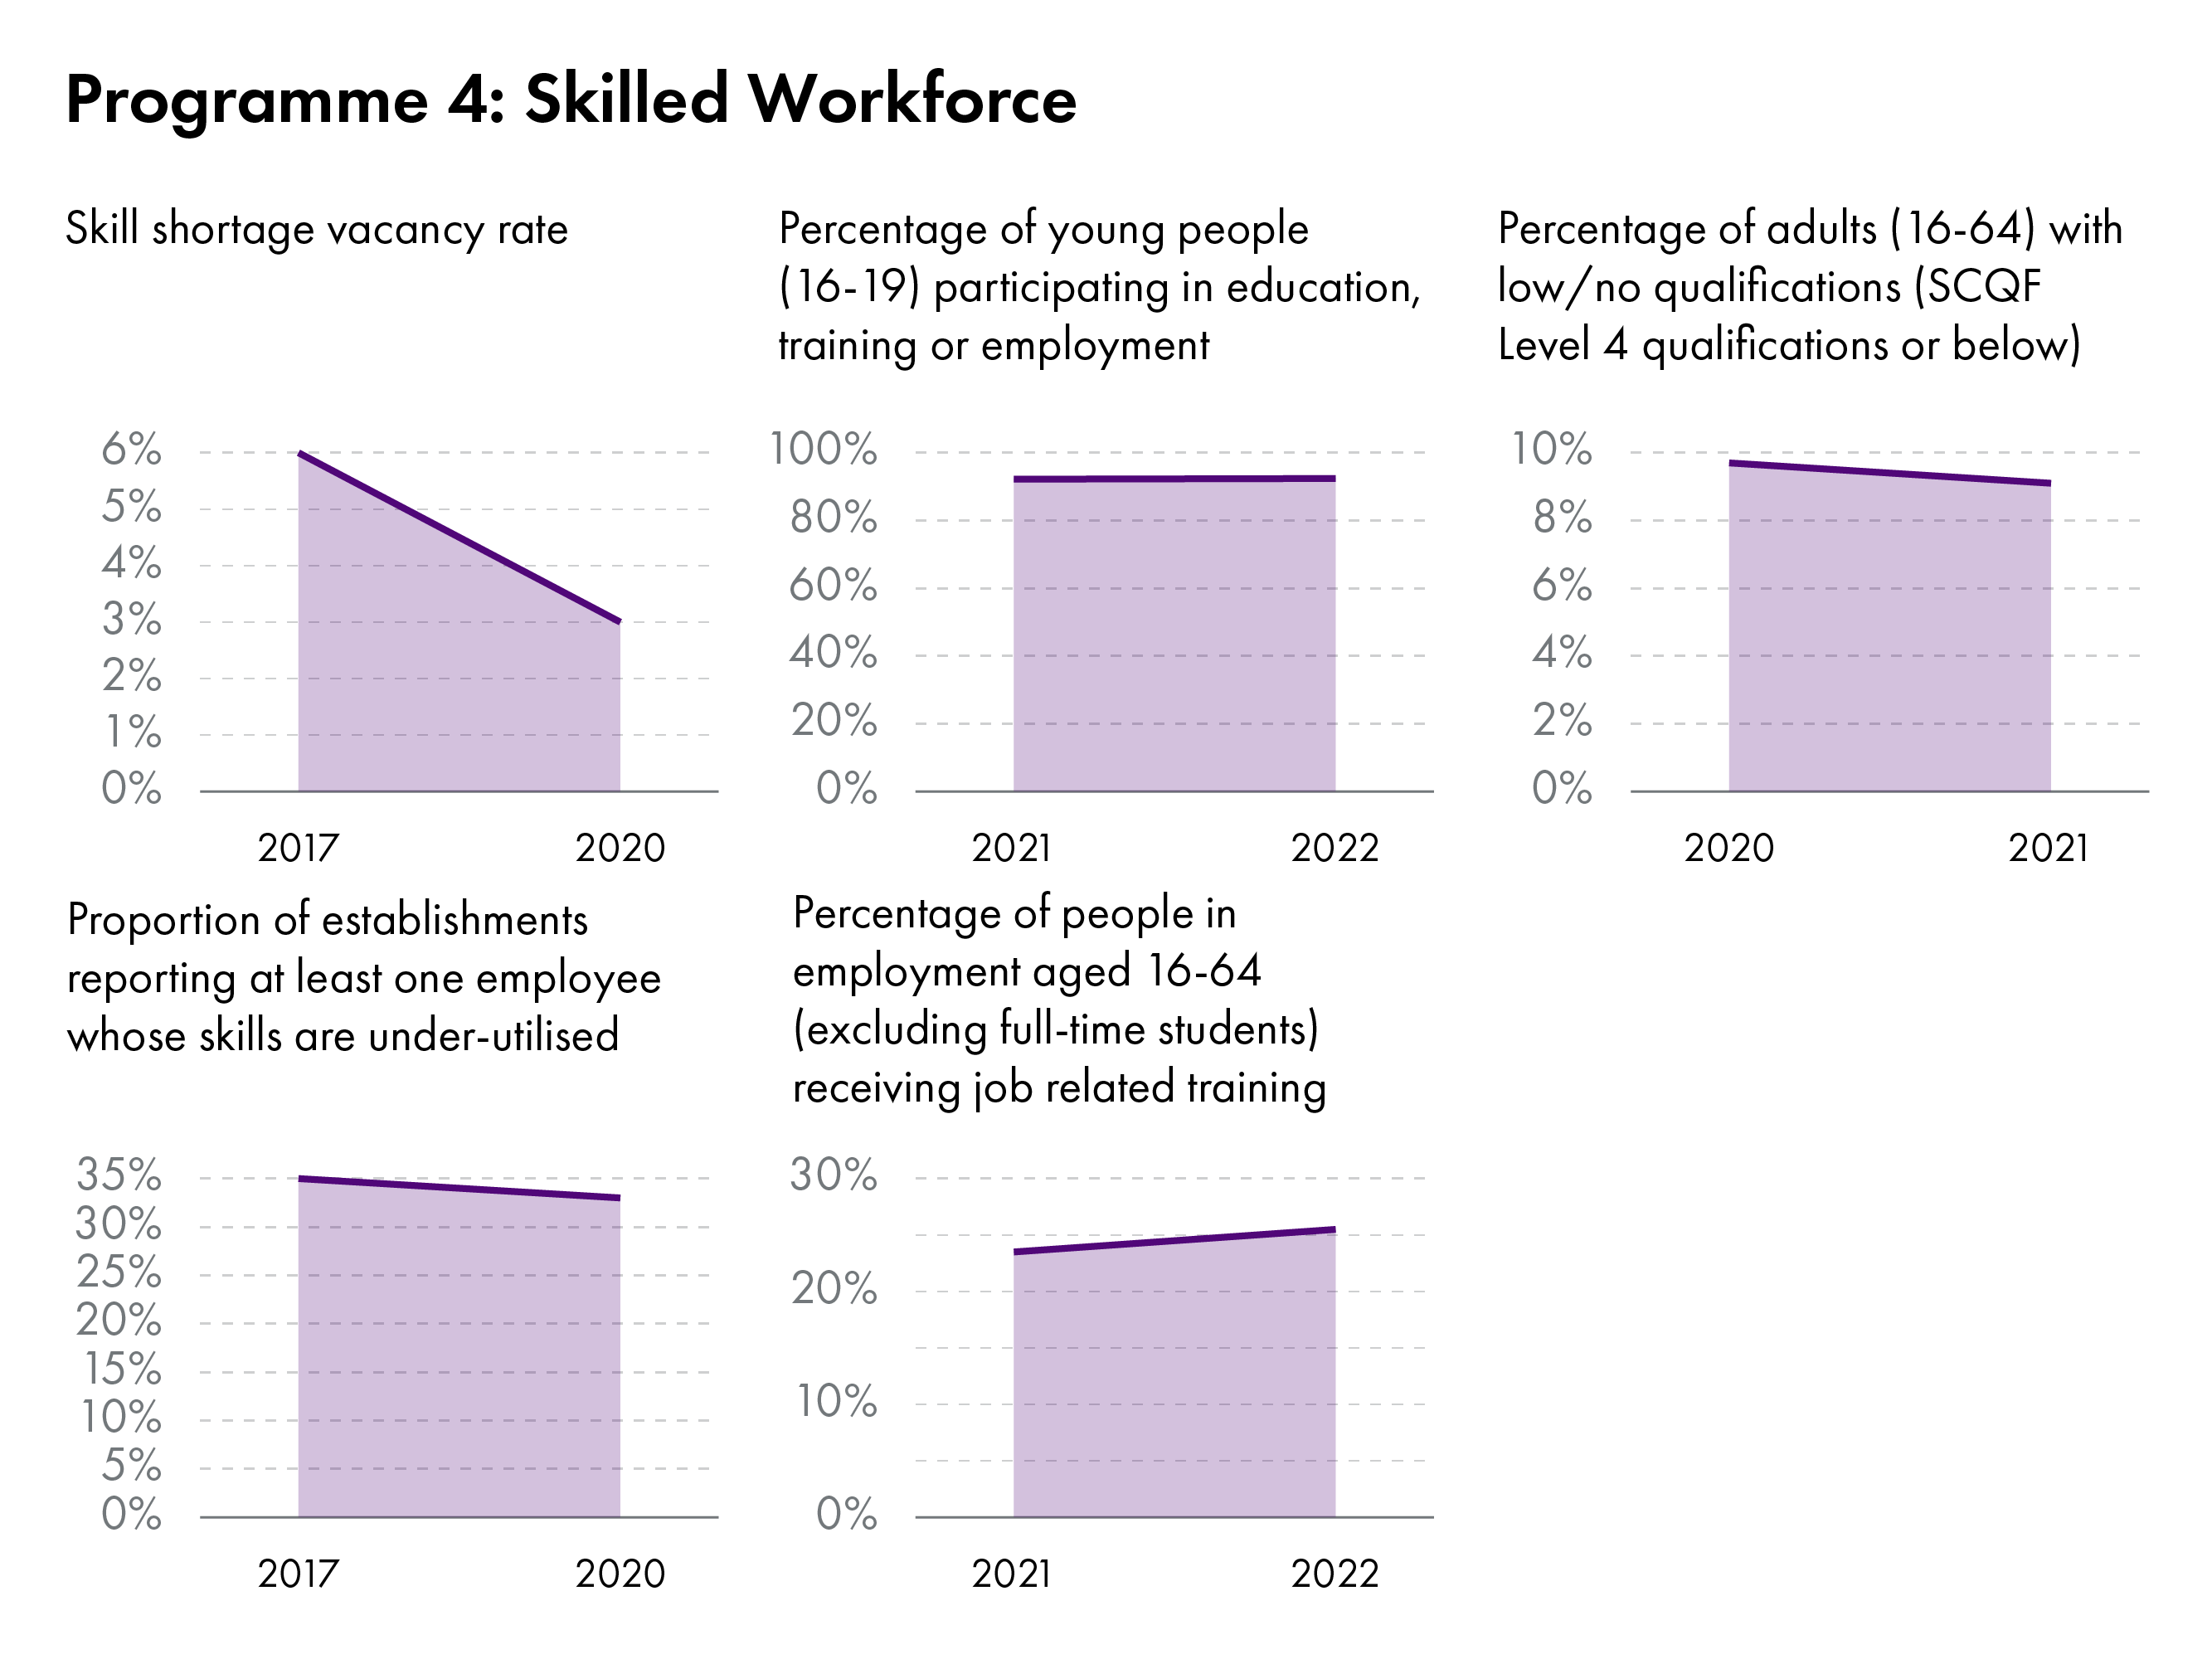 The key indicators for the ‘Skilled Workforce’ programme are skills shortage vacancy rate, percentage of young people in education, training or employment, percentage of adults with low or no qualifications, proportion of employers reported at least one employee with under utilised skills, and percentage of people in employment received job related training.